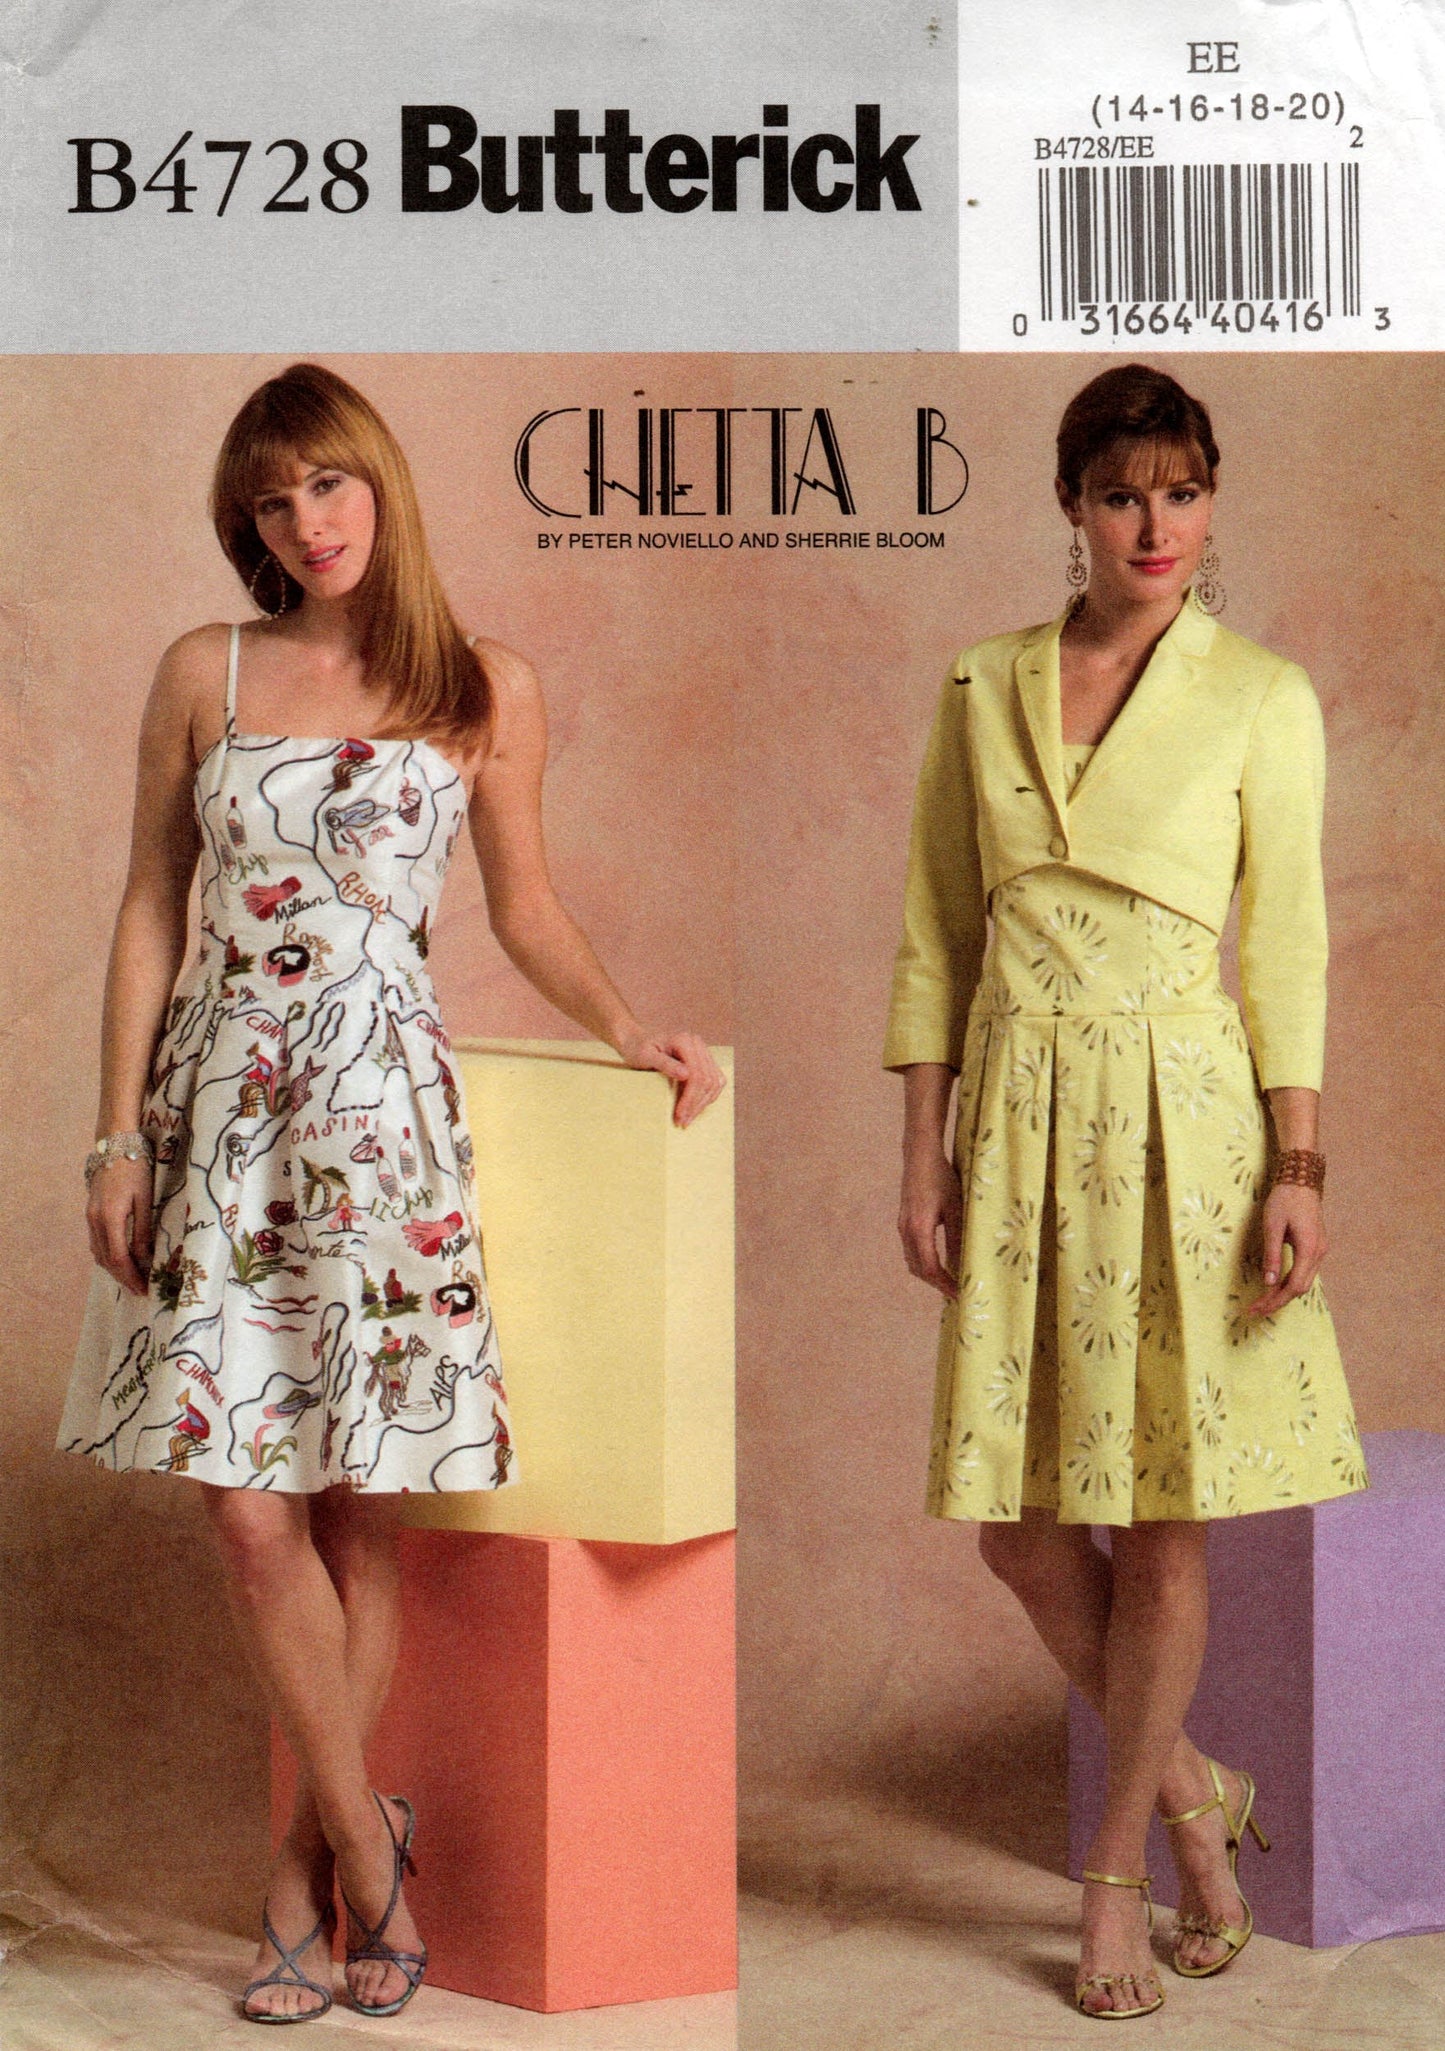 Butterick B4728 CHETTA B Womens Strappy Dress with Skirt Pleats & Bolero Out Of Print Sewing Pattern Size 6 - 12 or 14 - 20 UNCUT Factory Folded